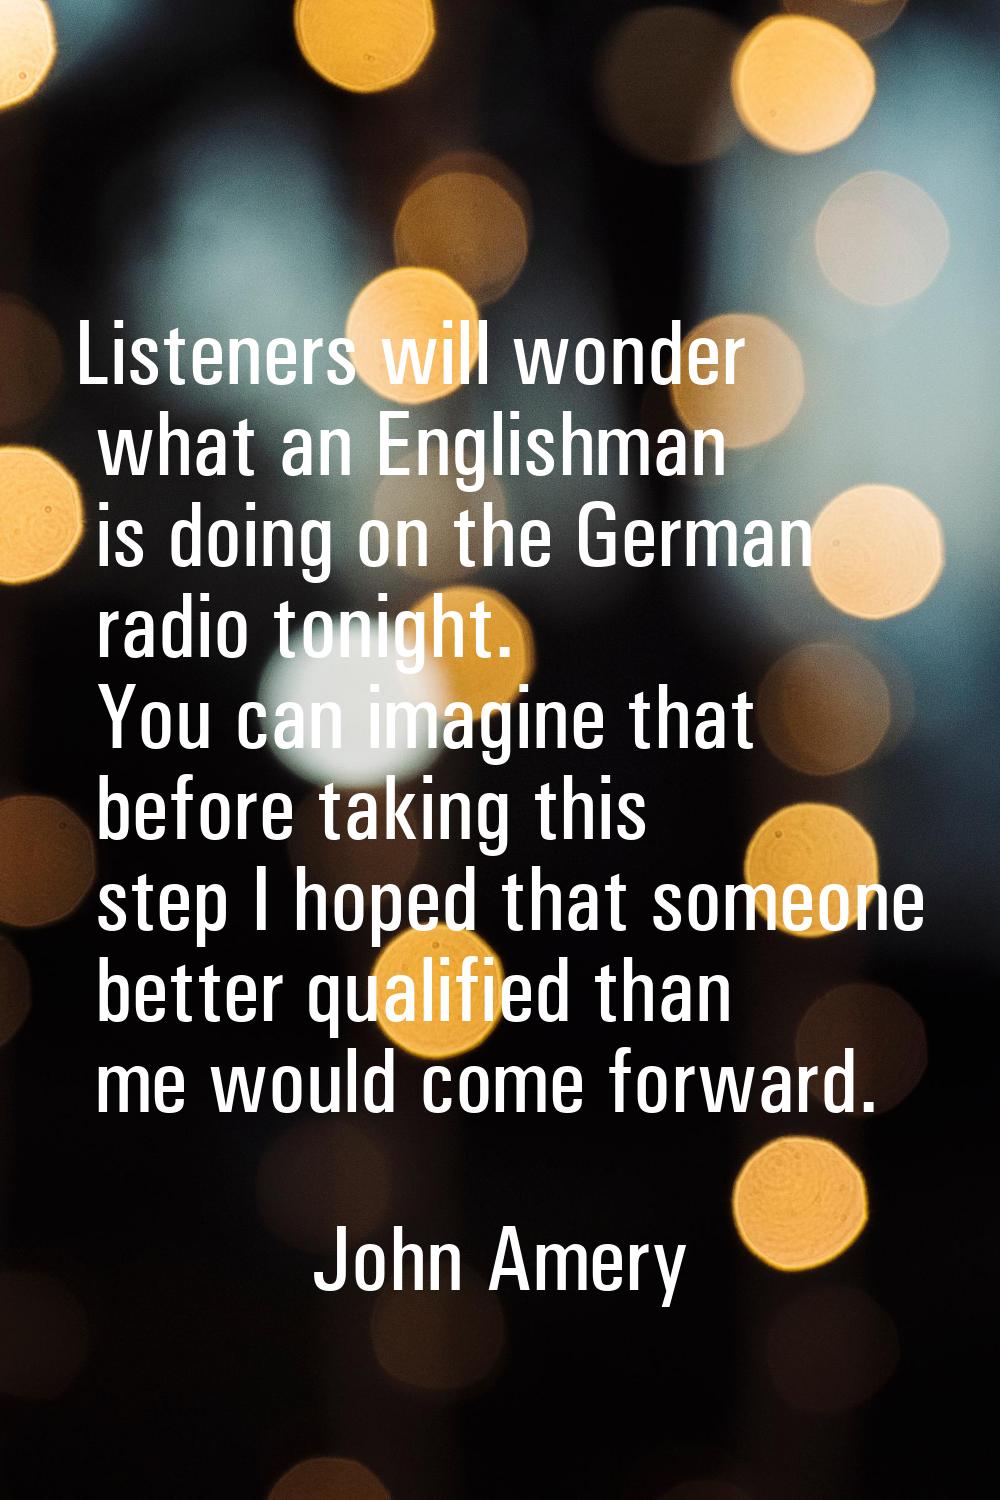 Listeners will wonder what an Englishman is doing on the German radio tonight. You can imagine that